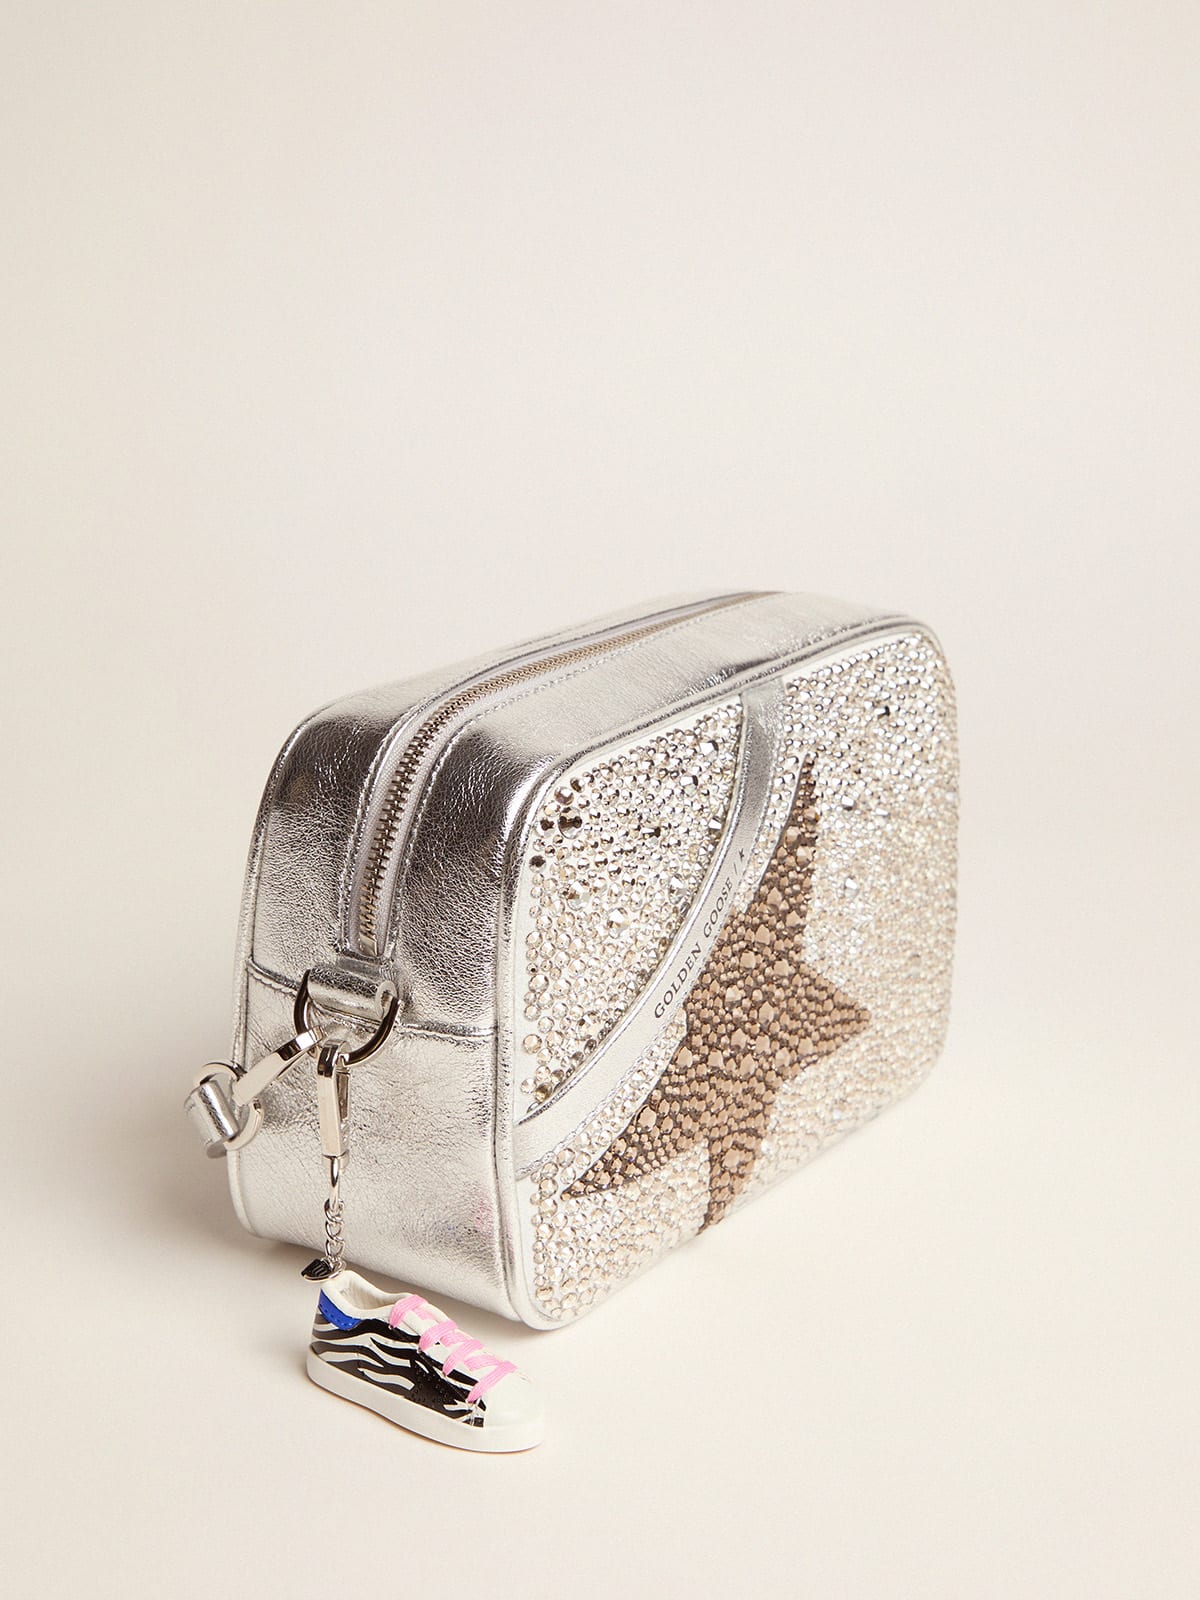 Golden Goose - Star Bag made of laminated leather with Swarovski crystals in 